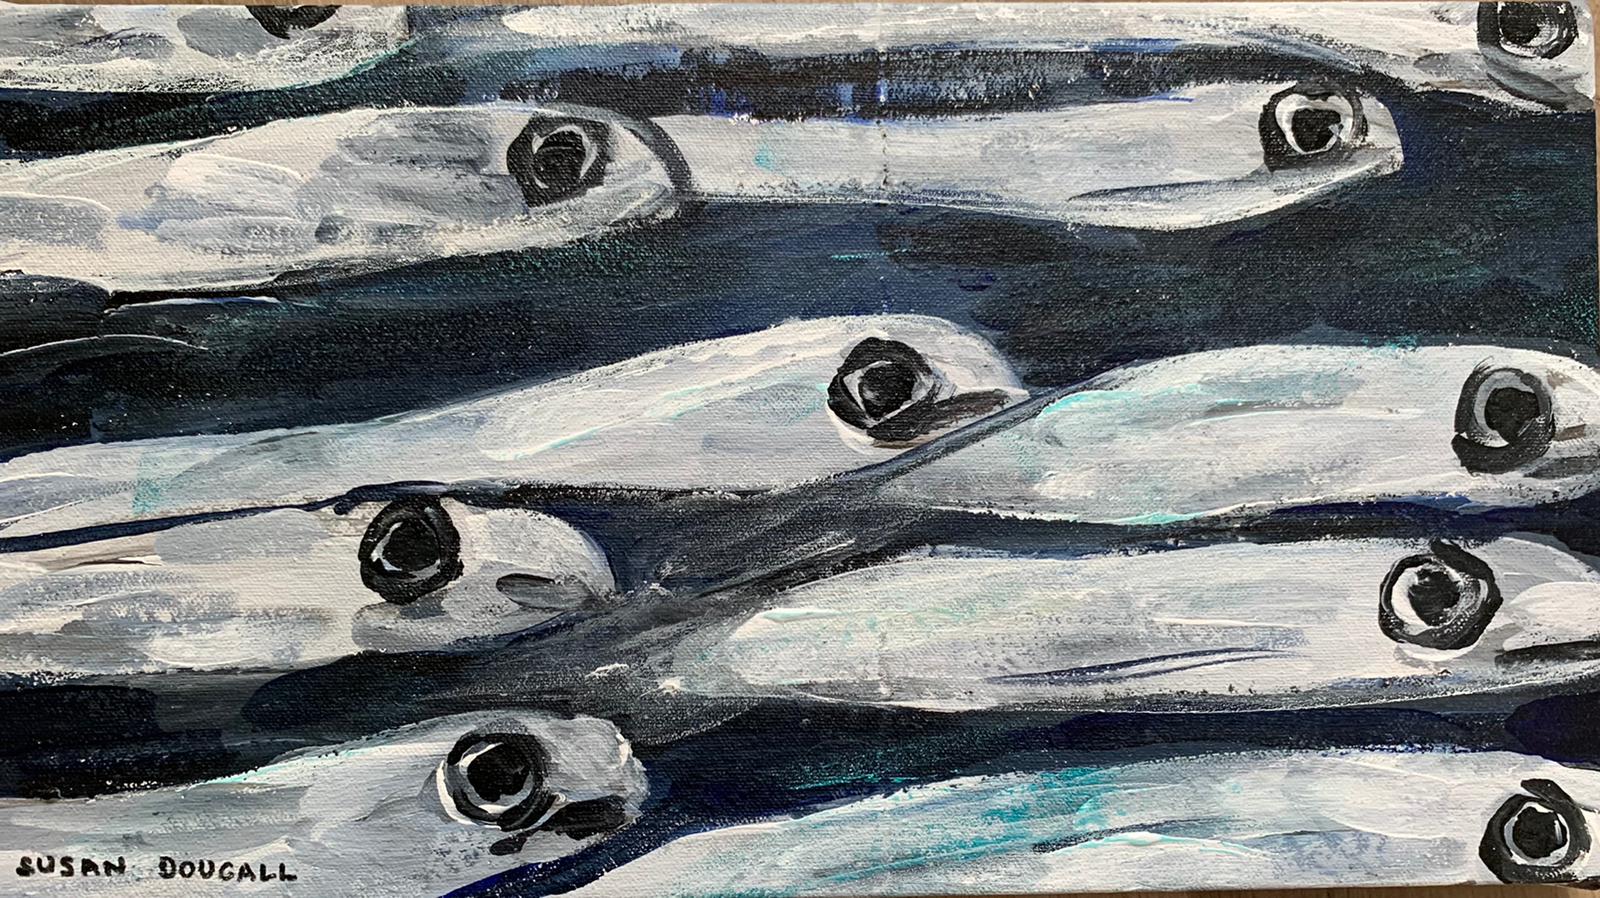 Group of Fish, 17.5"L x 10"W